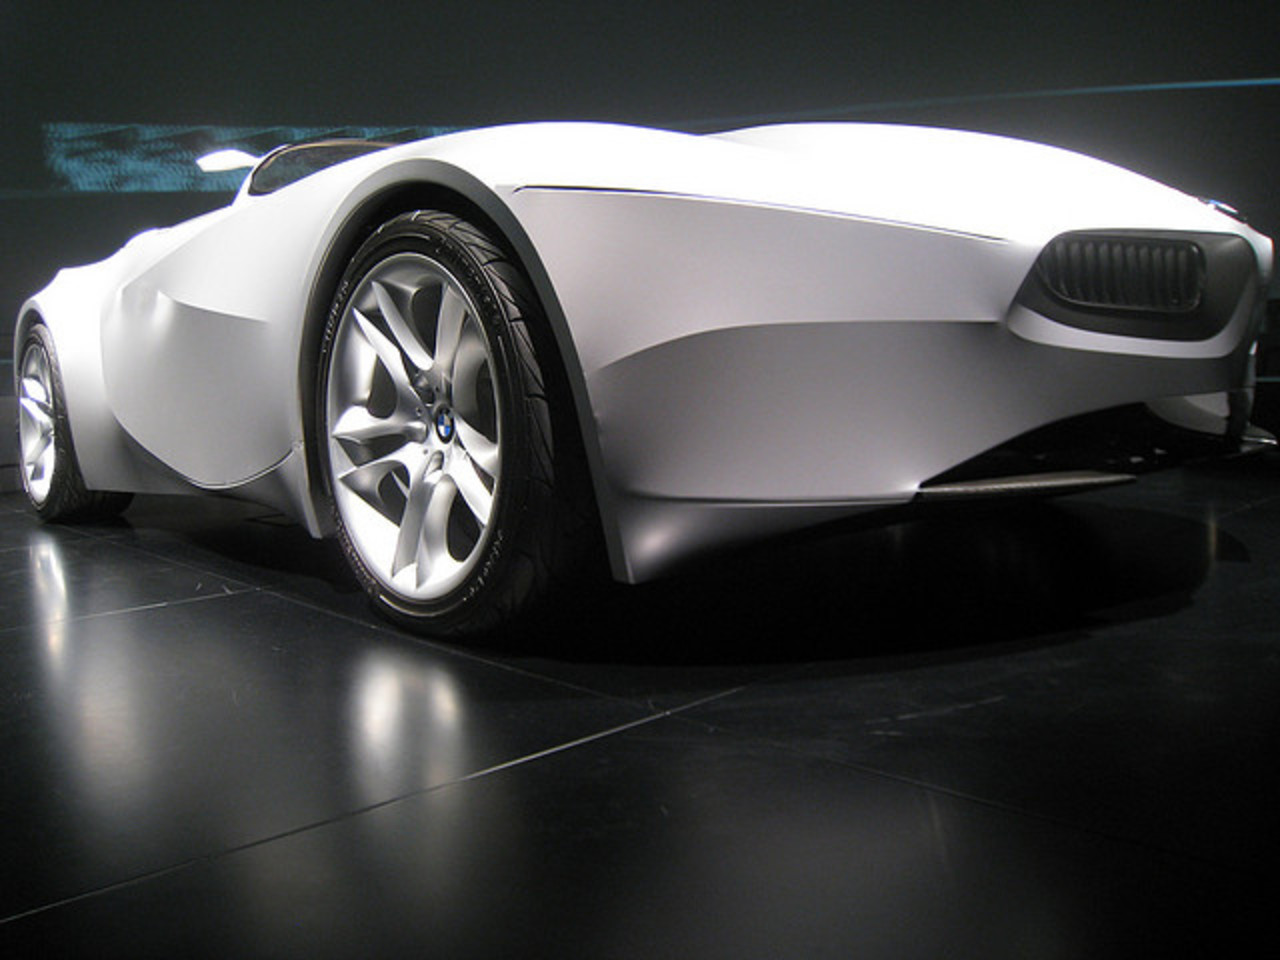 CONCEPT CARS - a gallery on Flickr